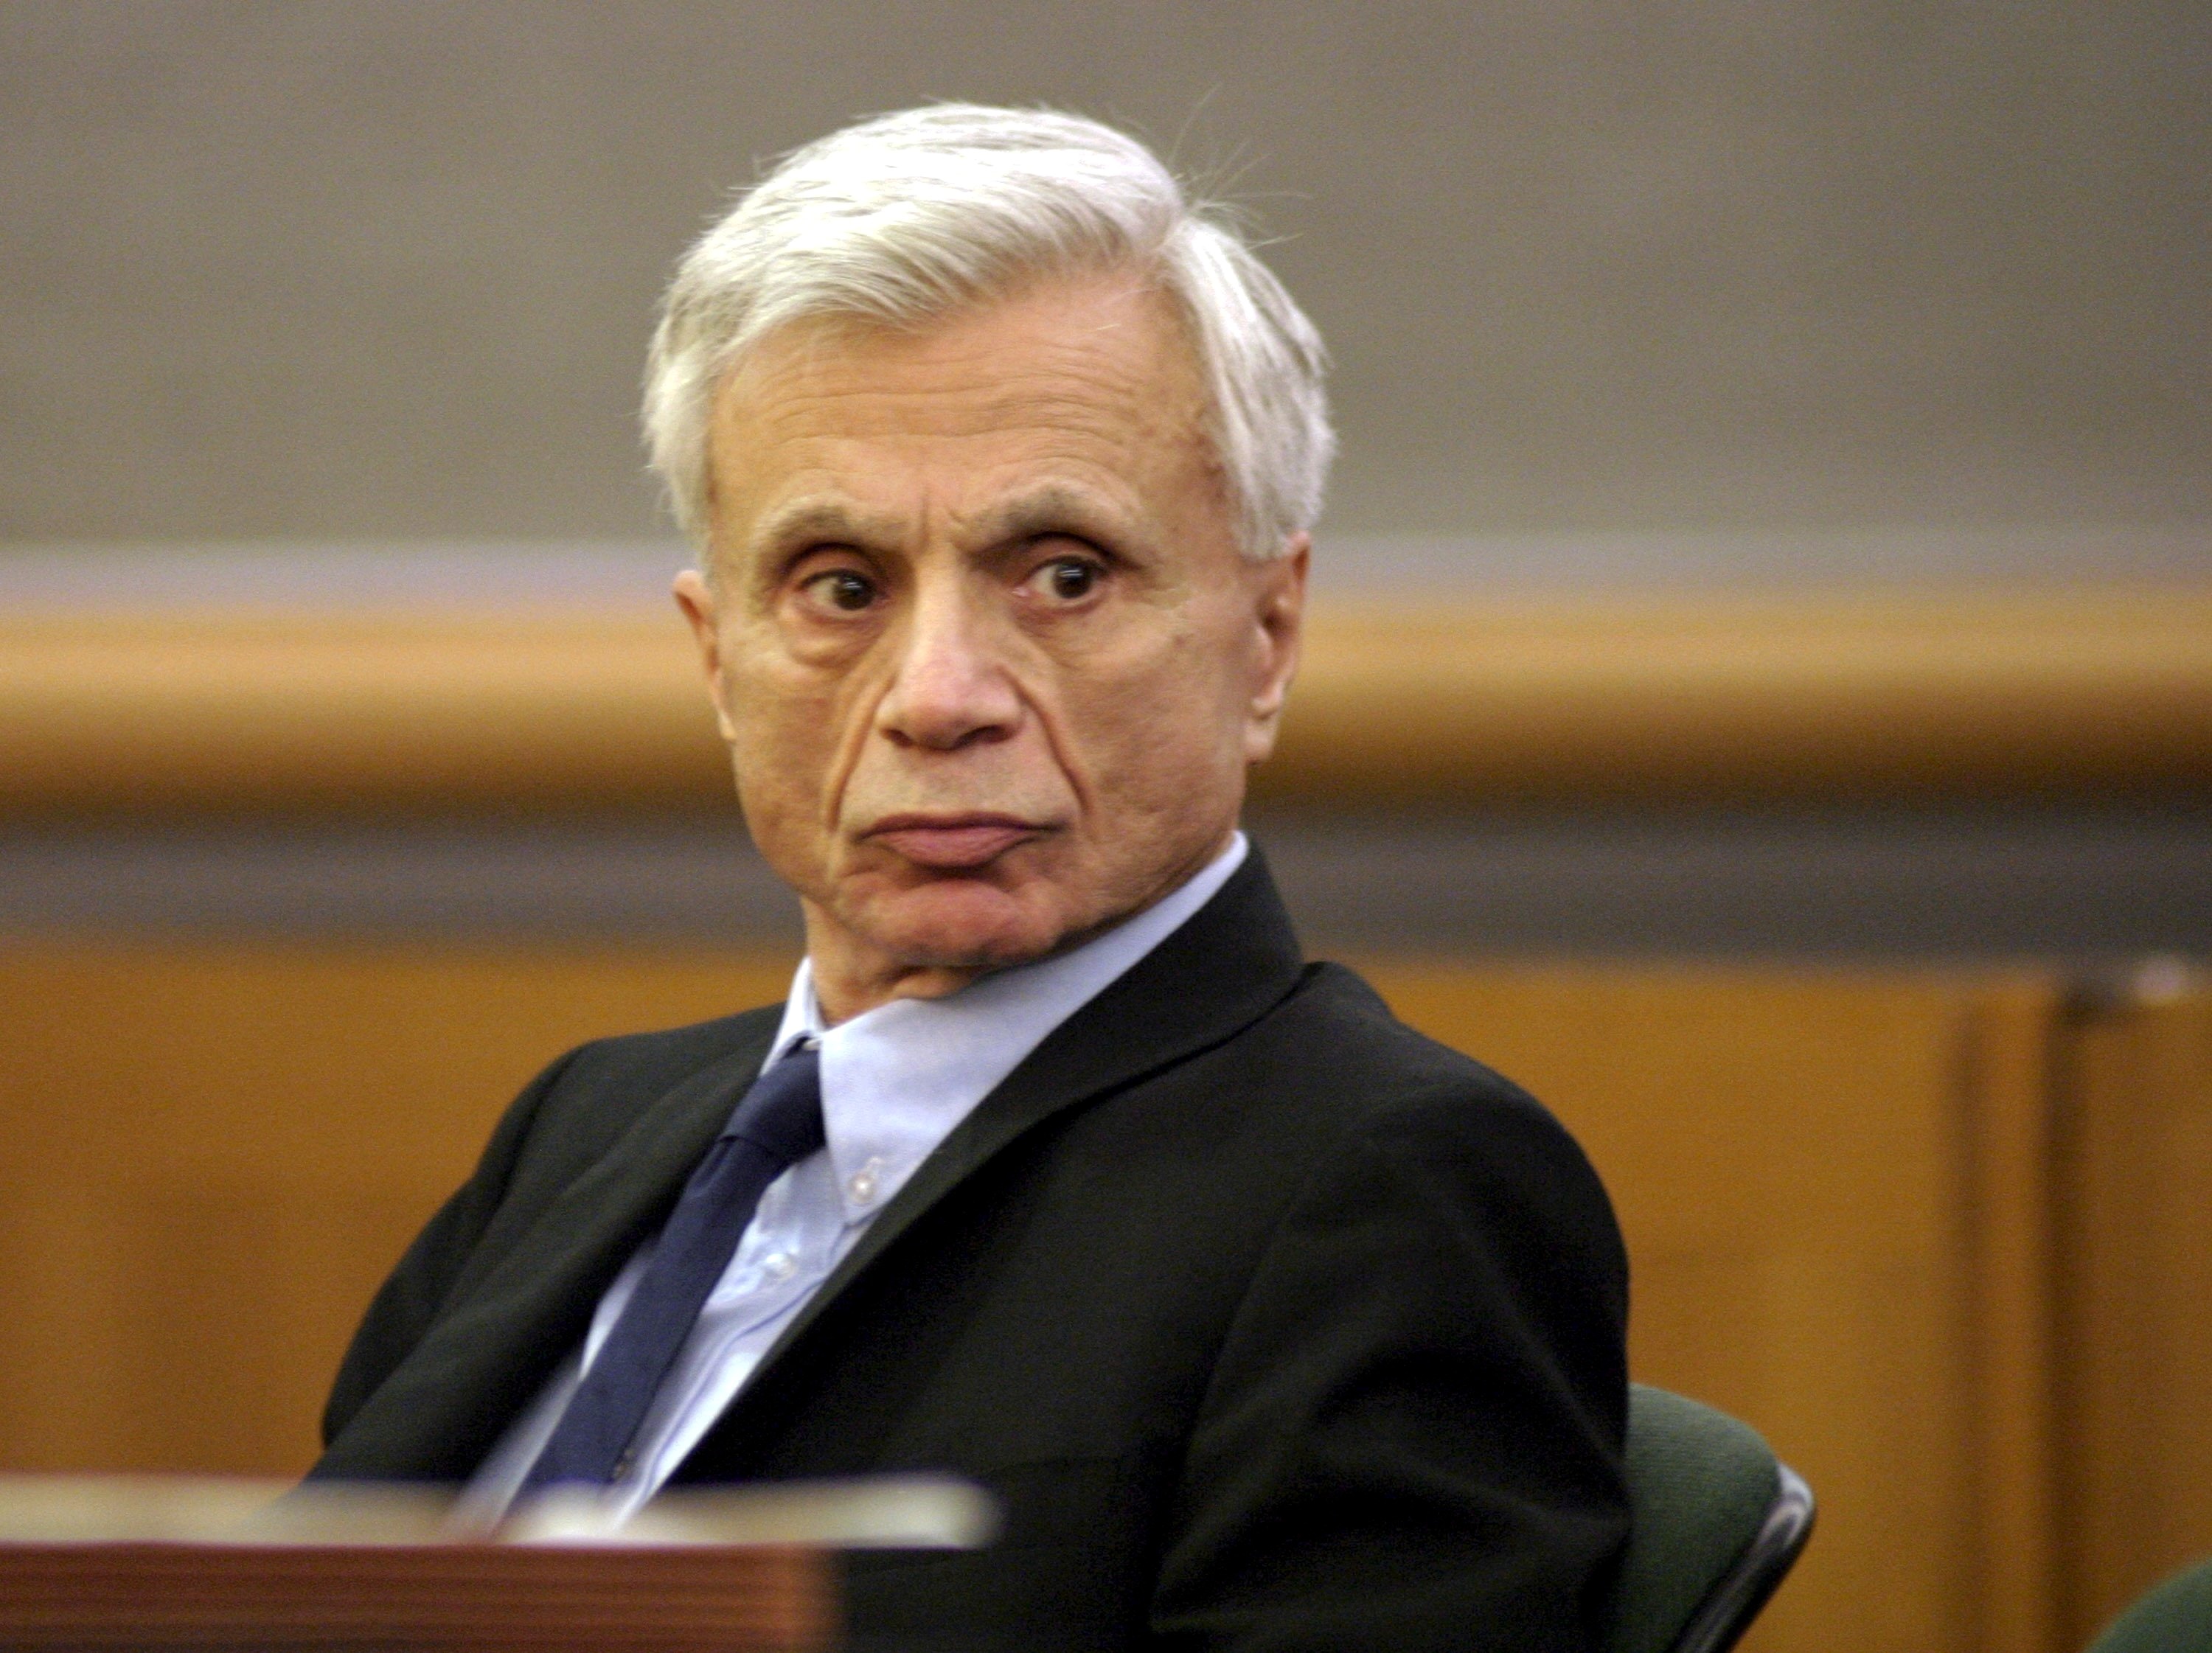 Robert Blake in court in Los Angeles, on September 17, 2004 | Source: Getty Images